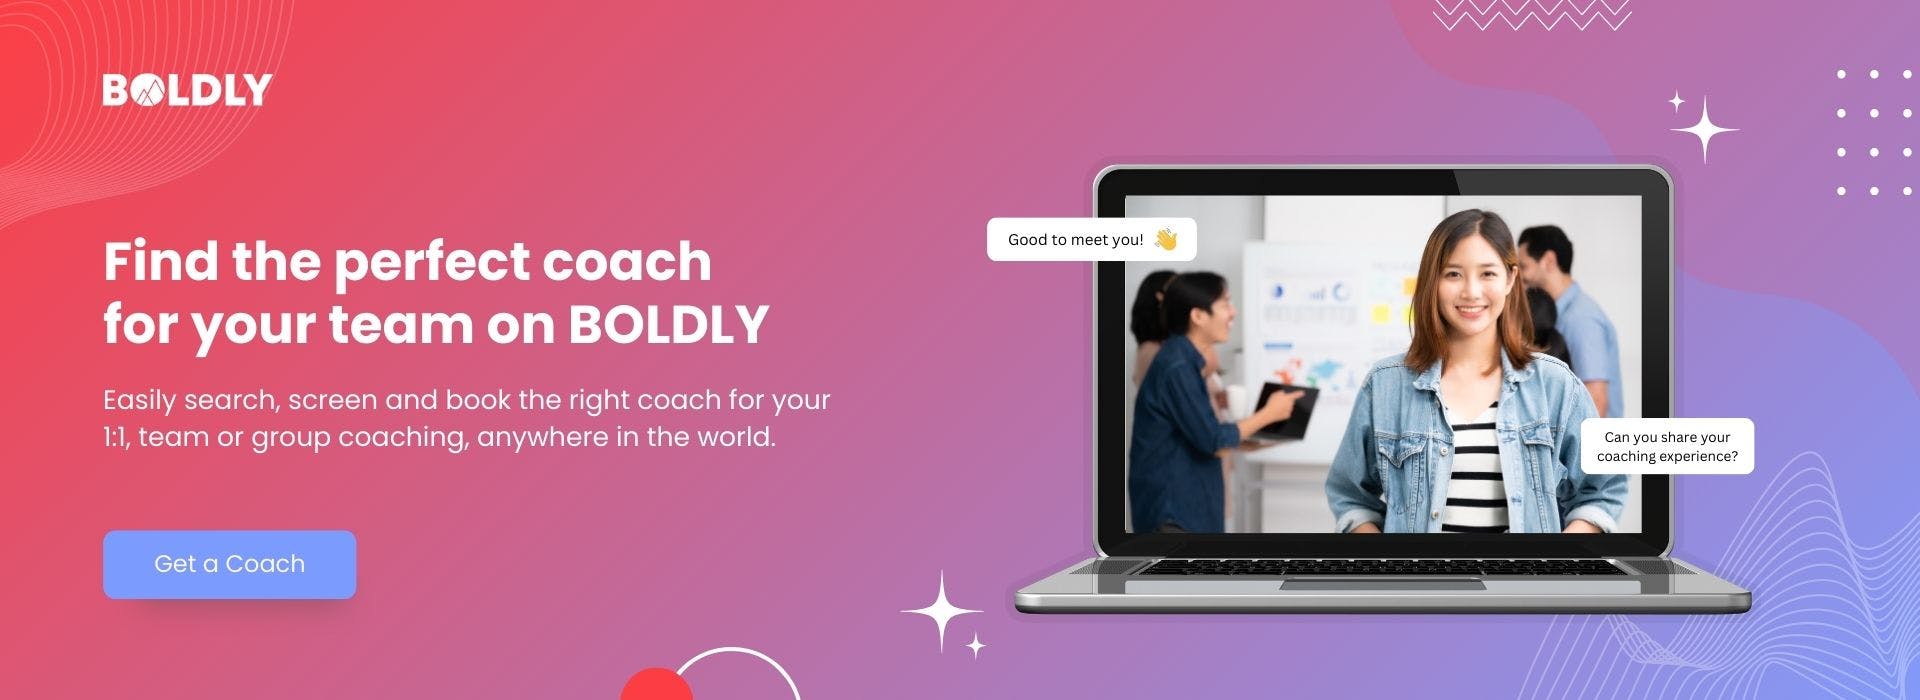 Find the perfect coach with BOLDLY